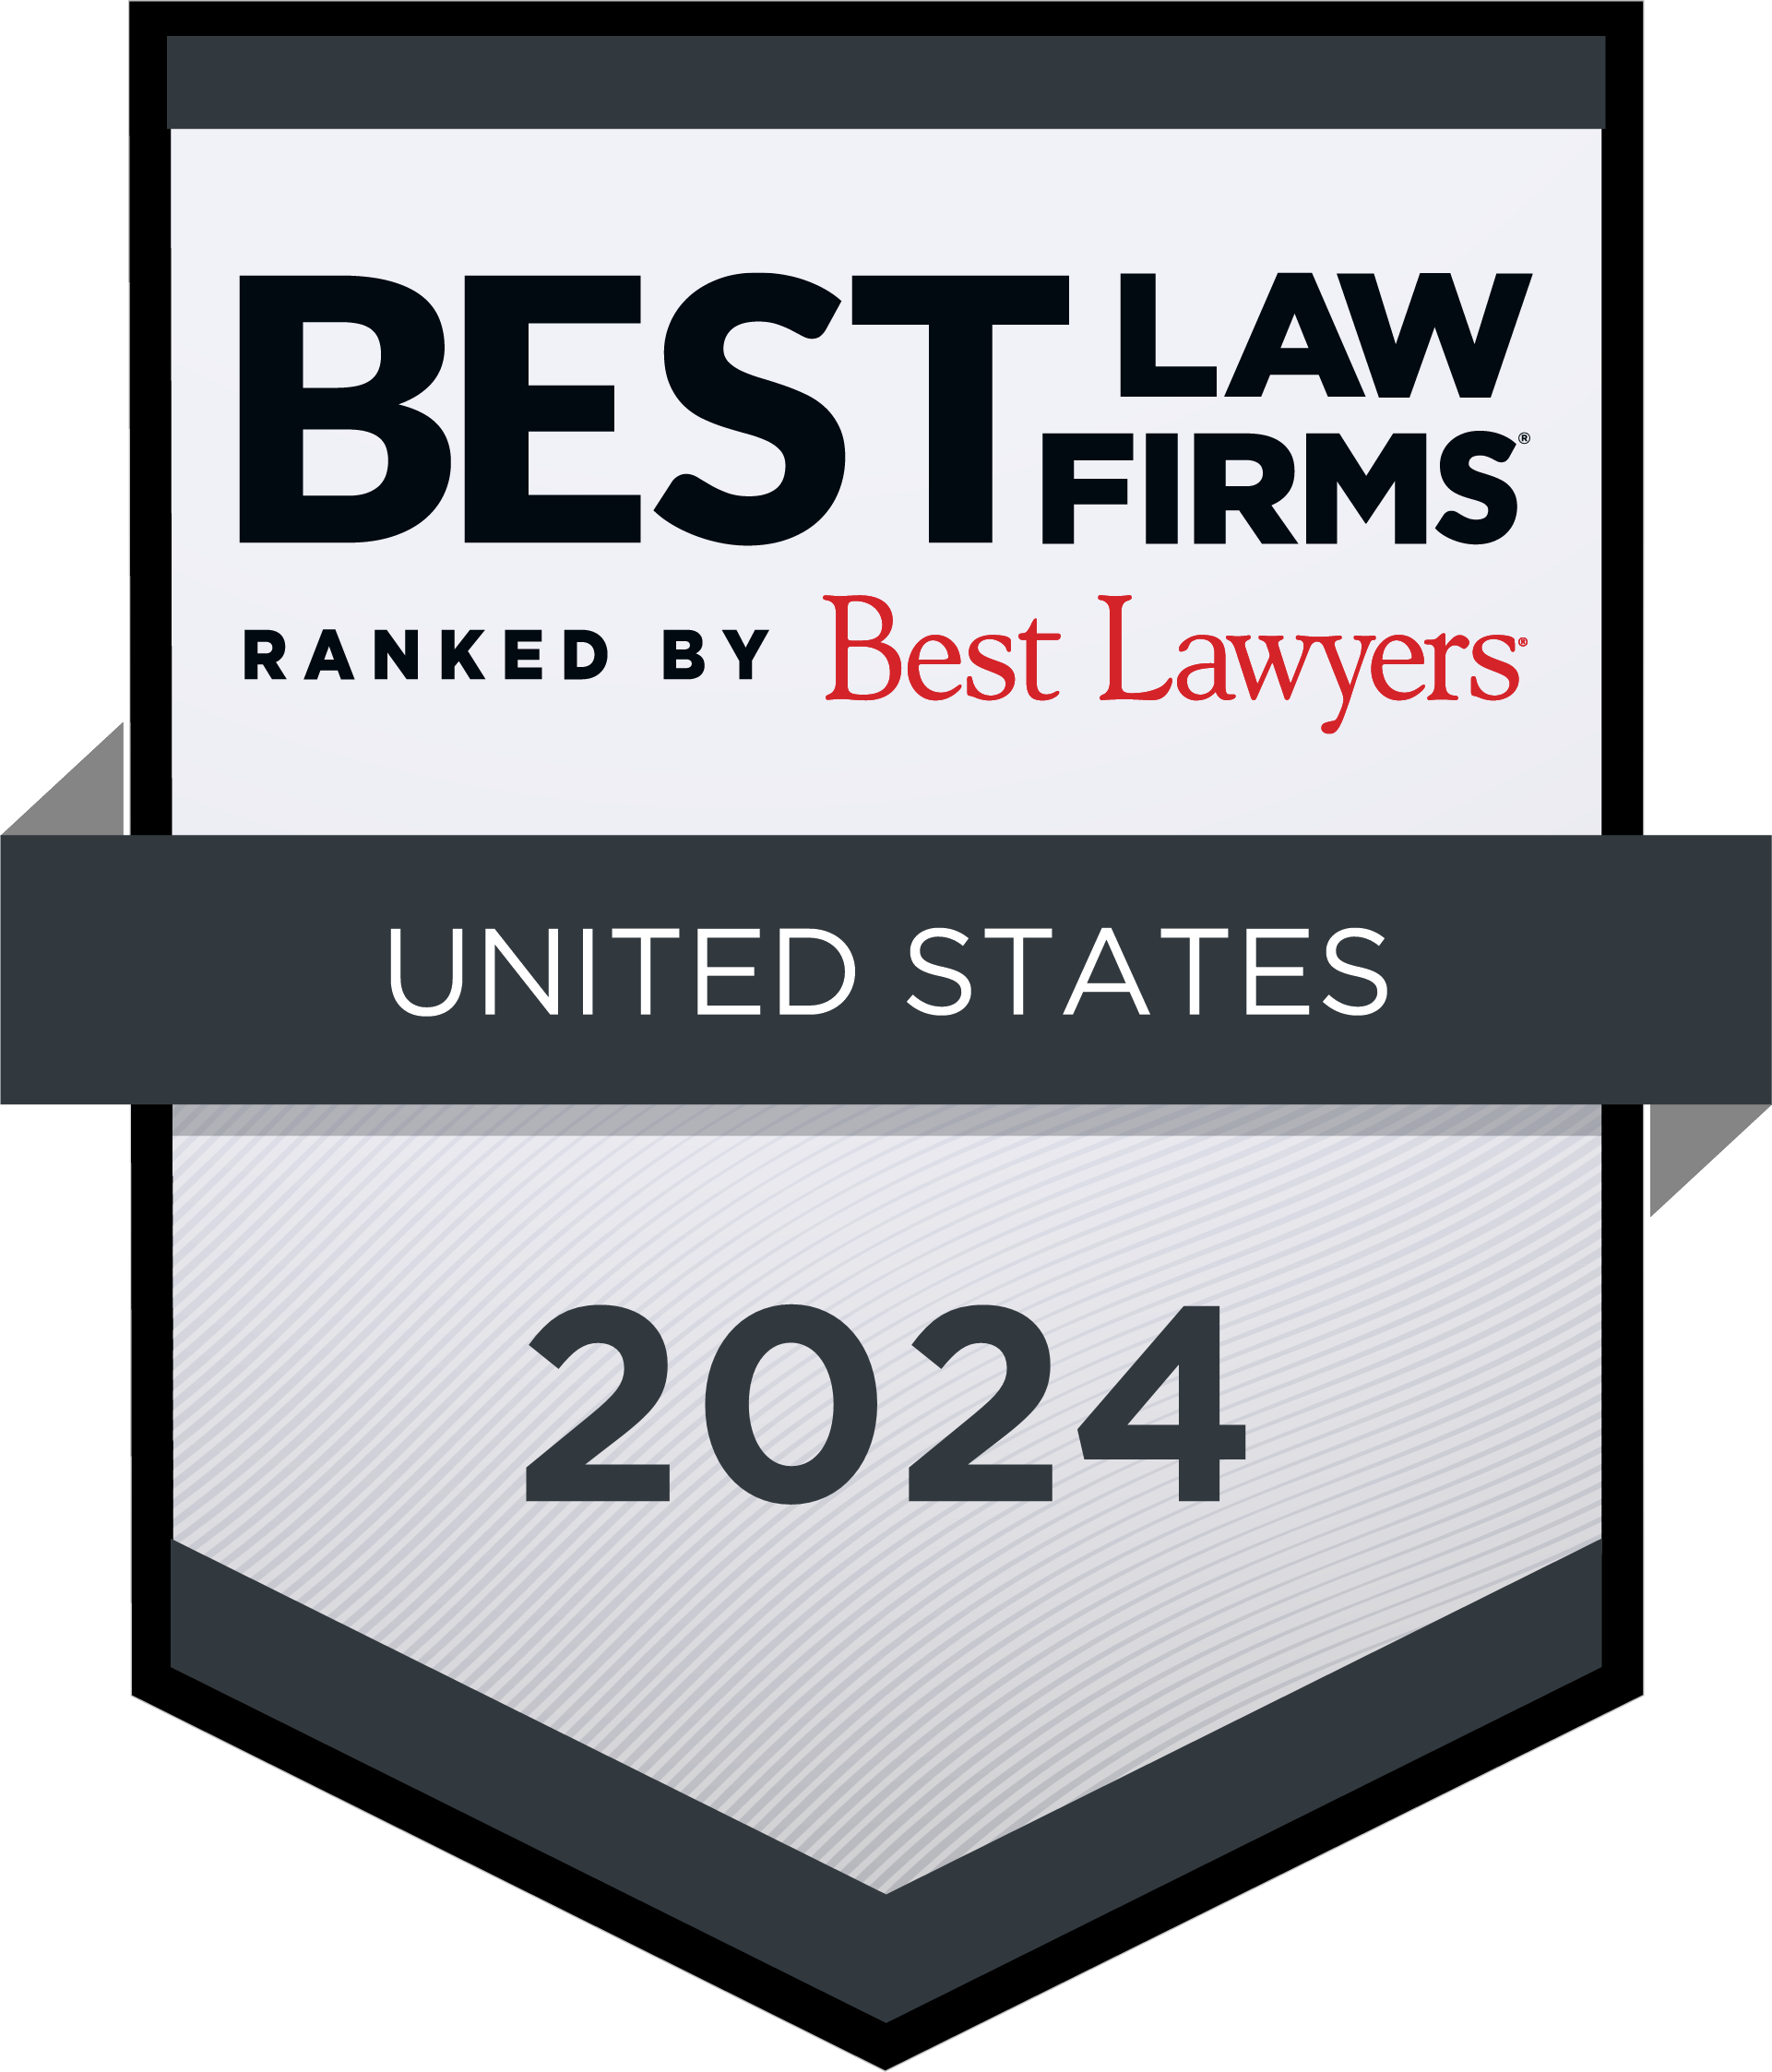 Best Lawyers Law Firms 2021